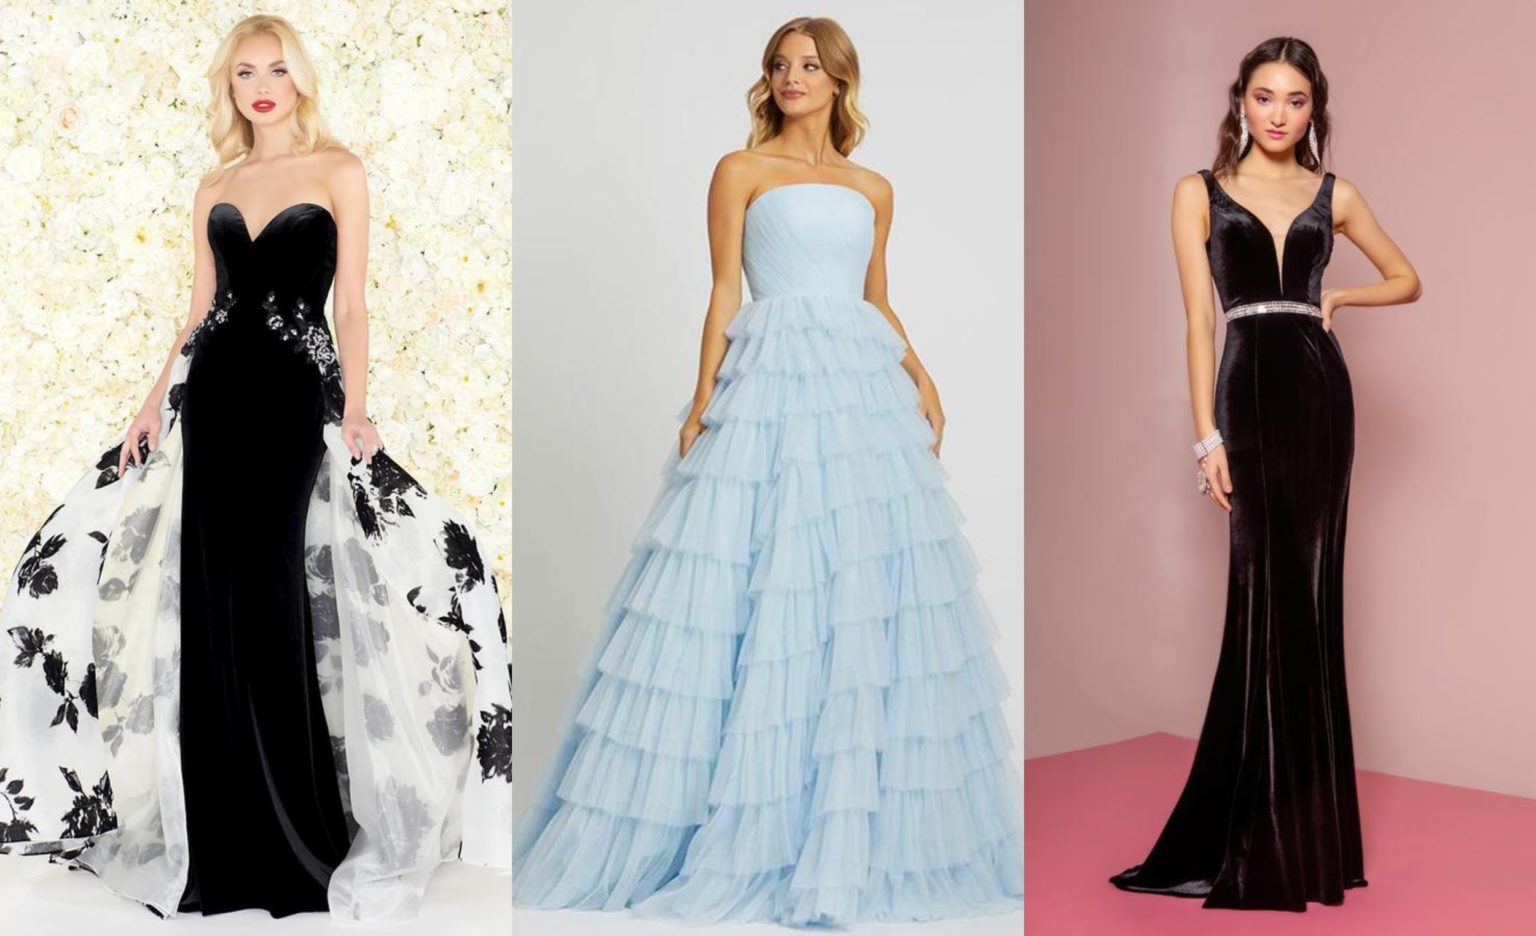 5 Necklines That Will Rule This Prom Season - A Best Fashion